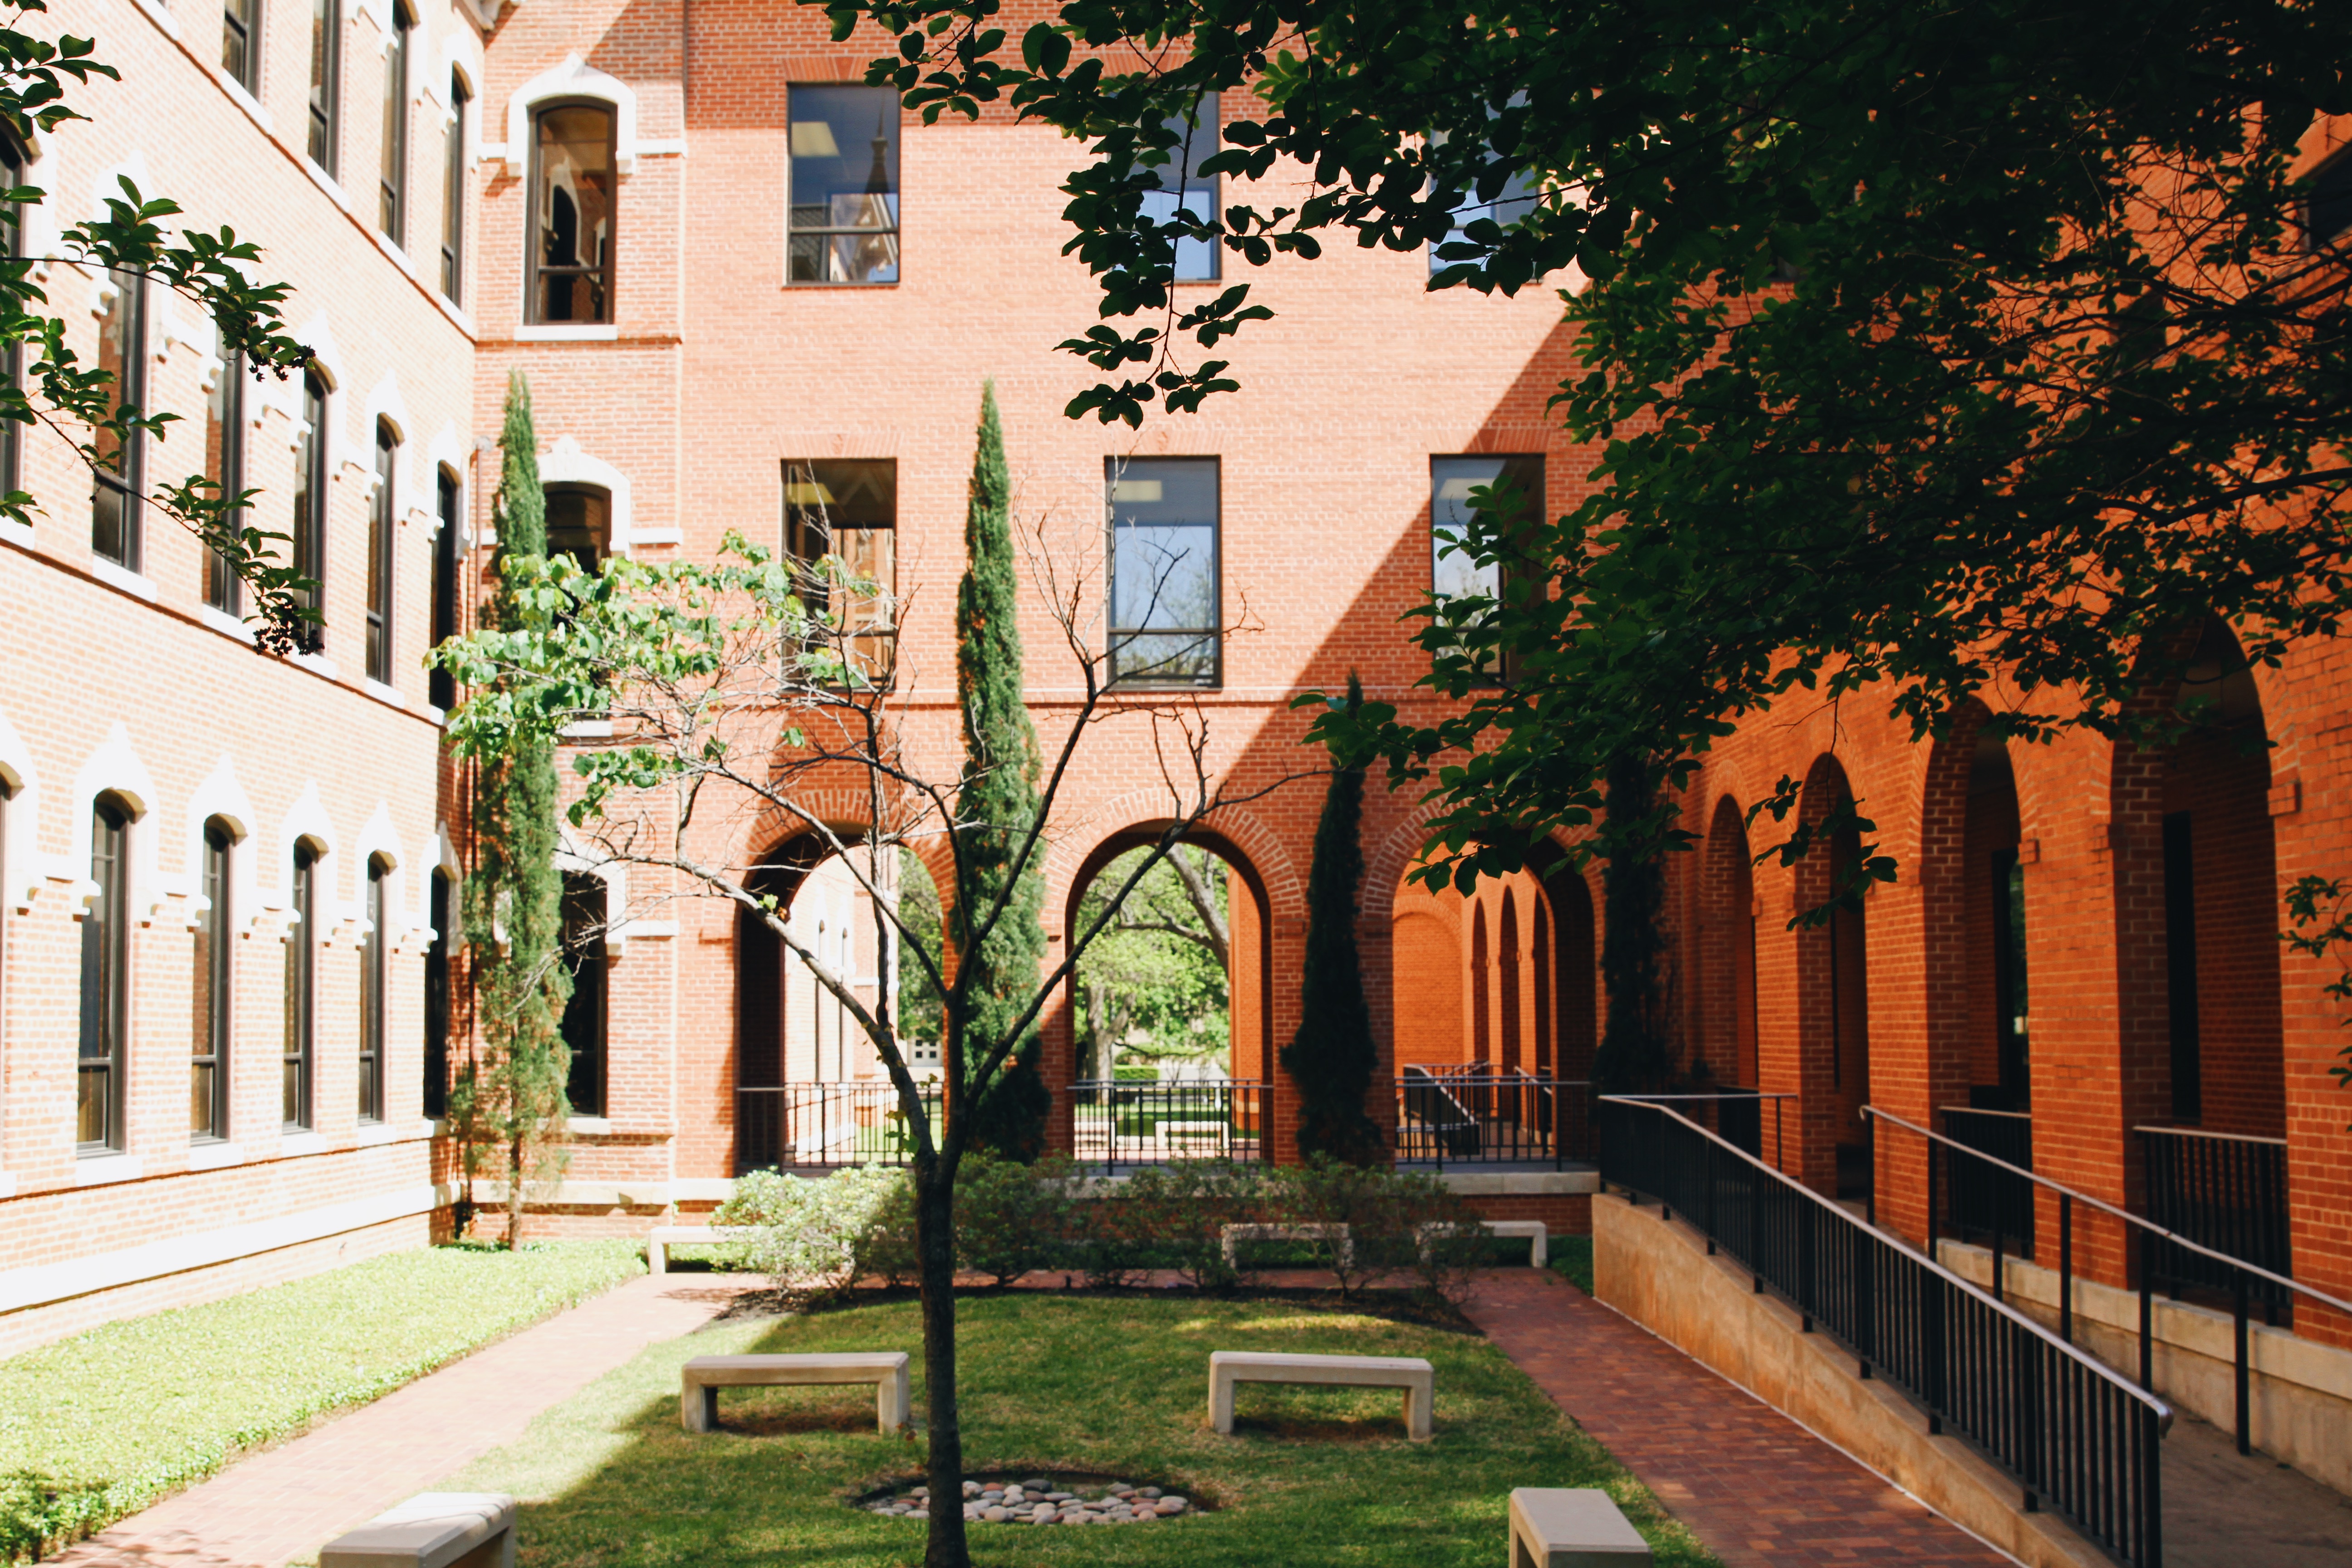 The courtyard between Old Main and Draper